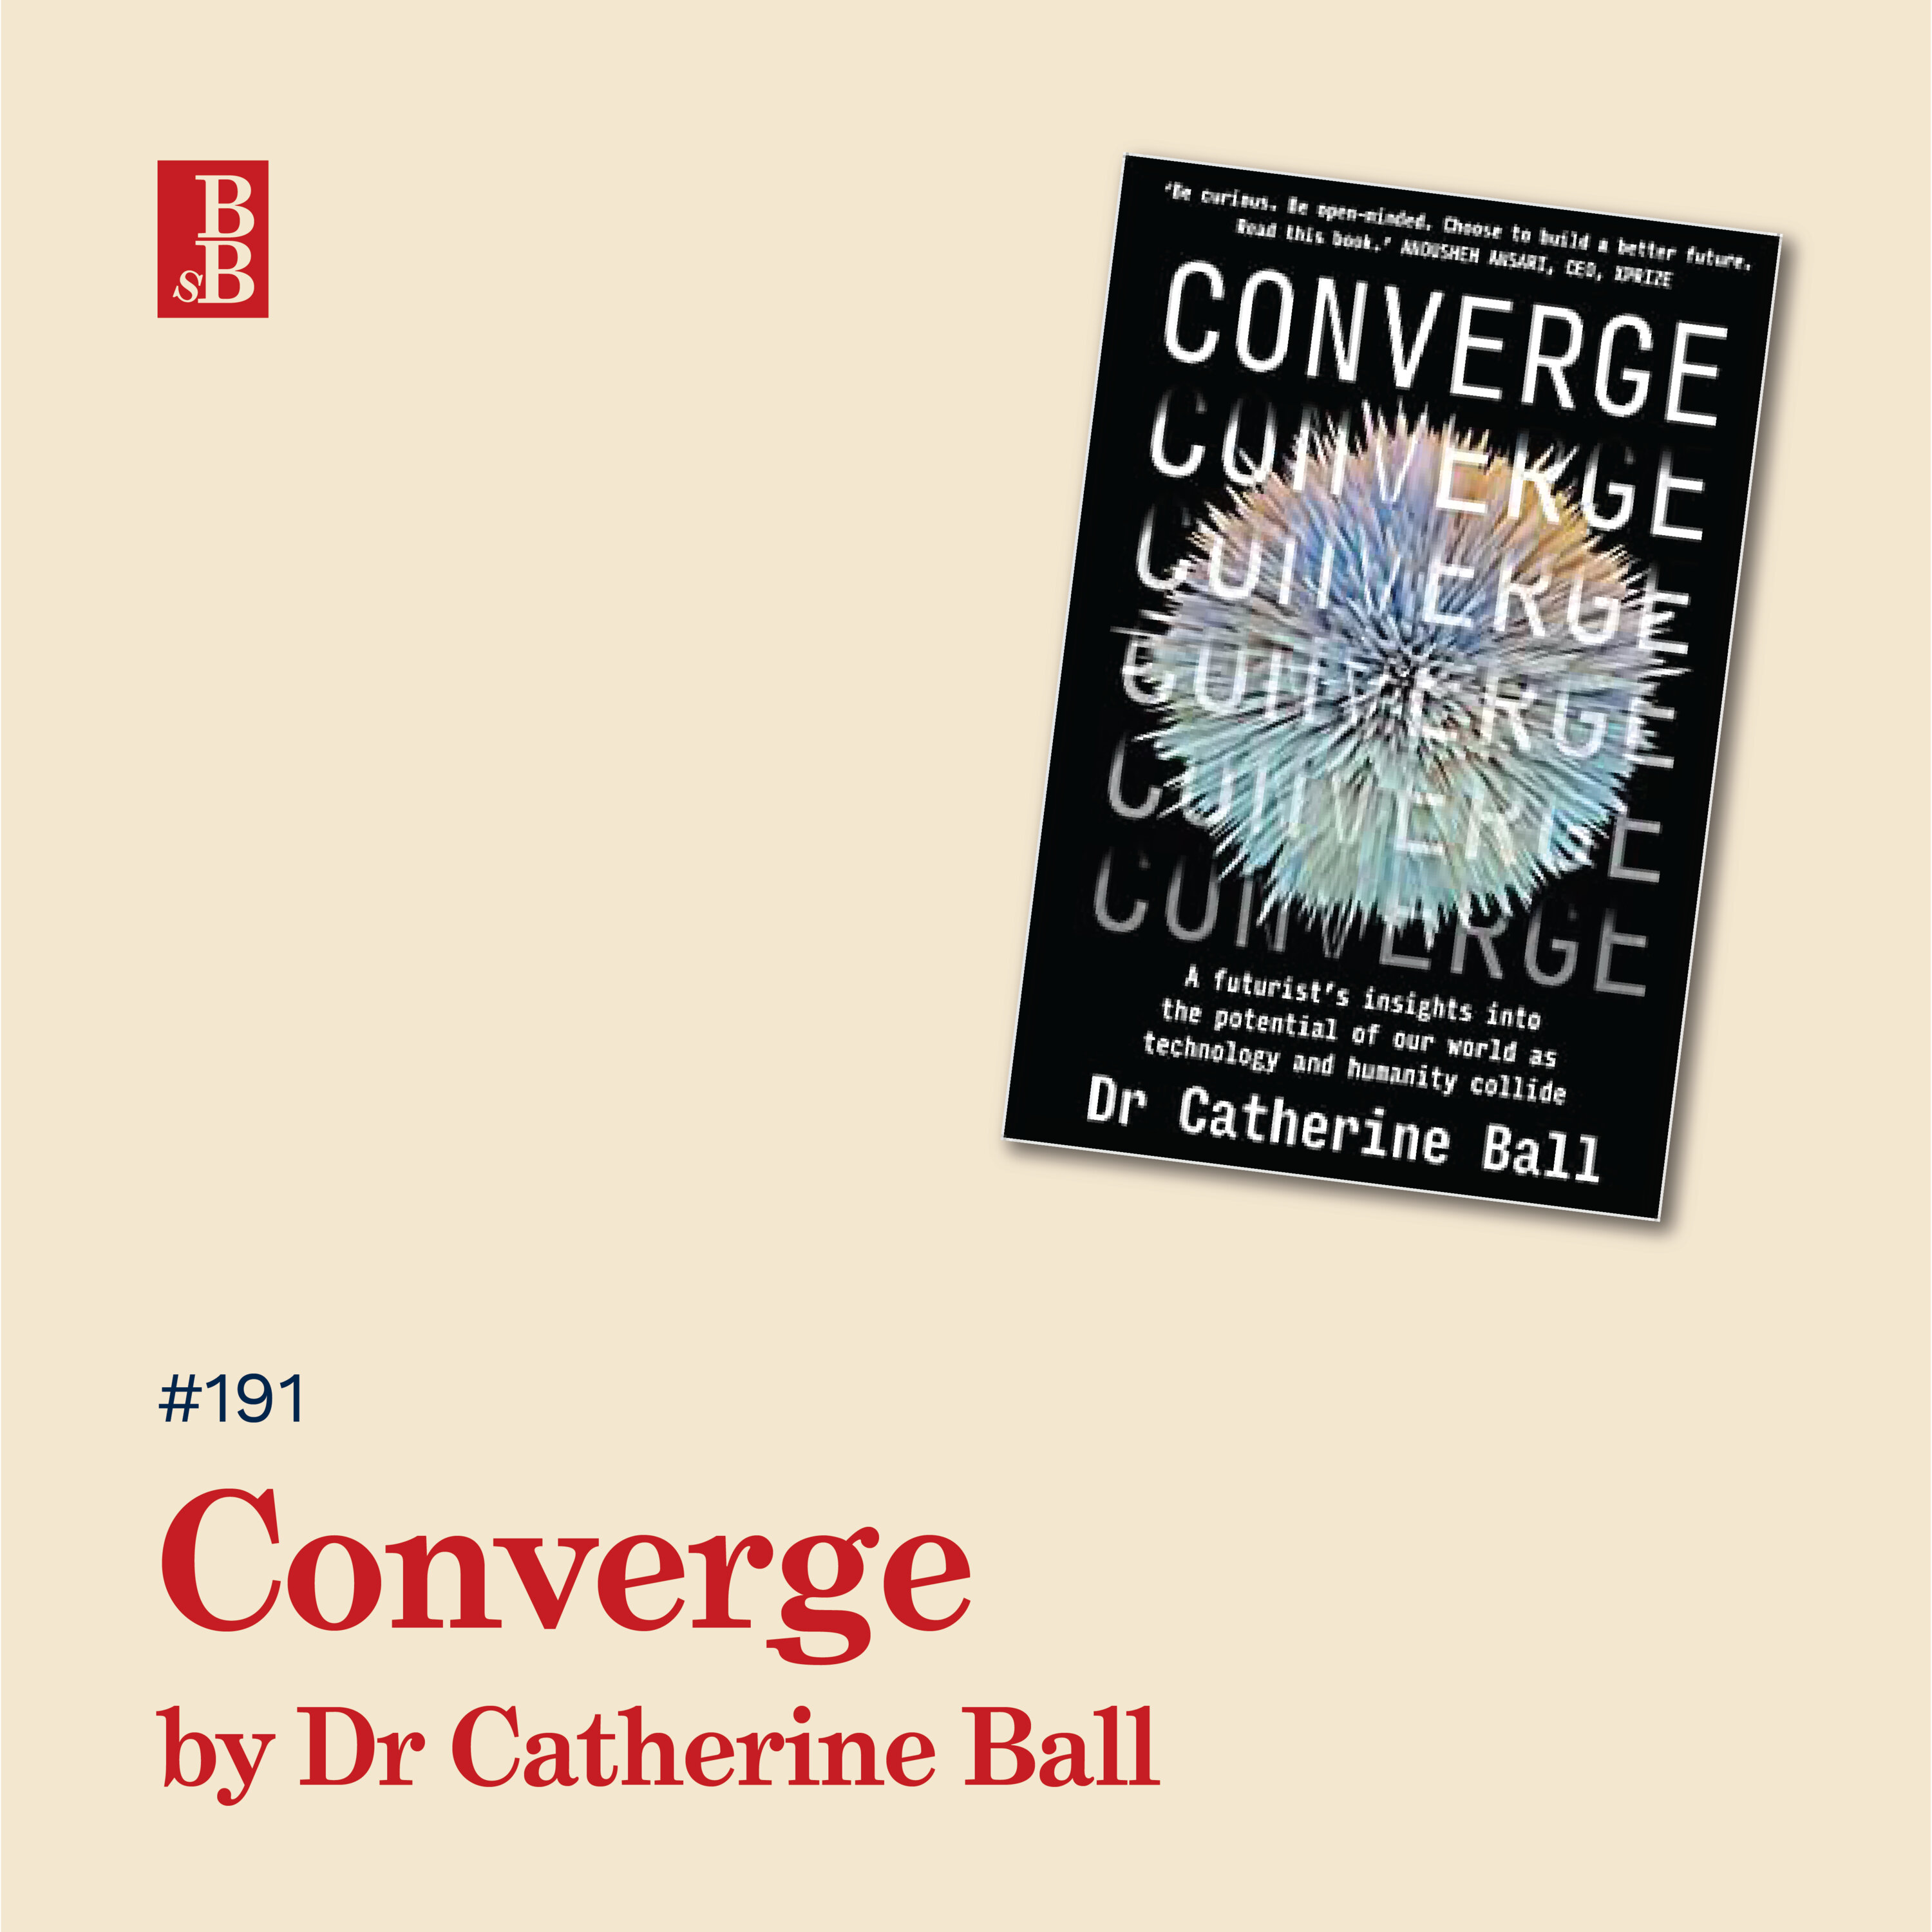 Converge by Dr Catherine Ball: how to see into the future